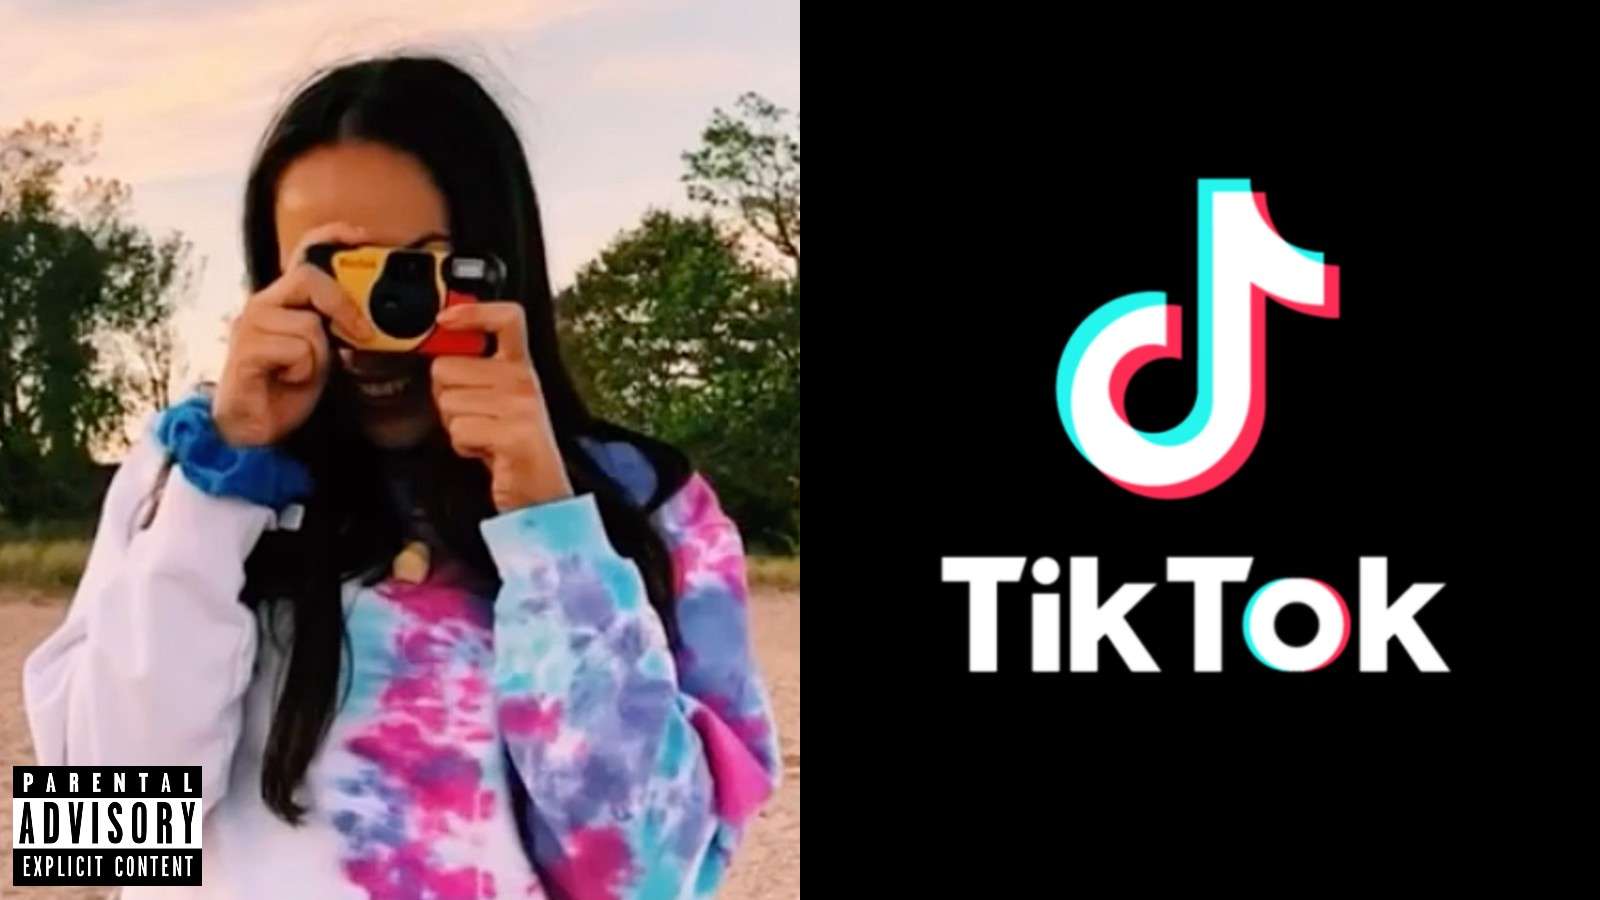 TikTok users make album covers out of regular pictures